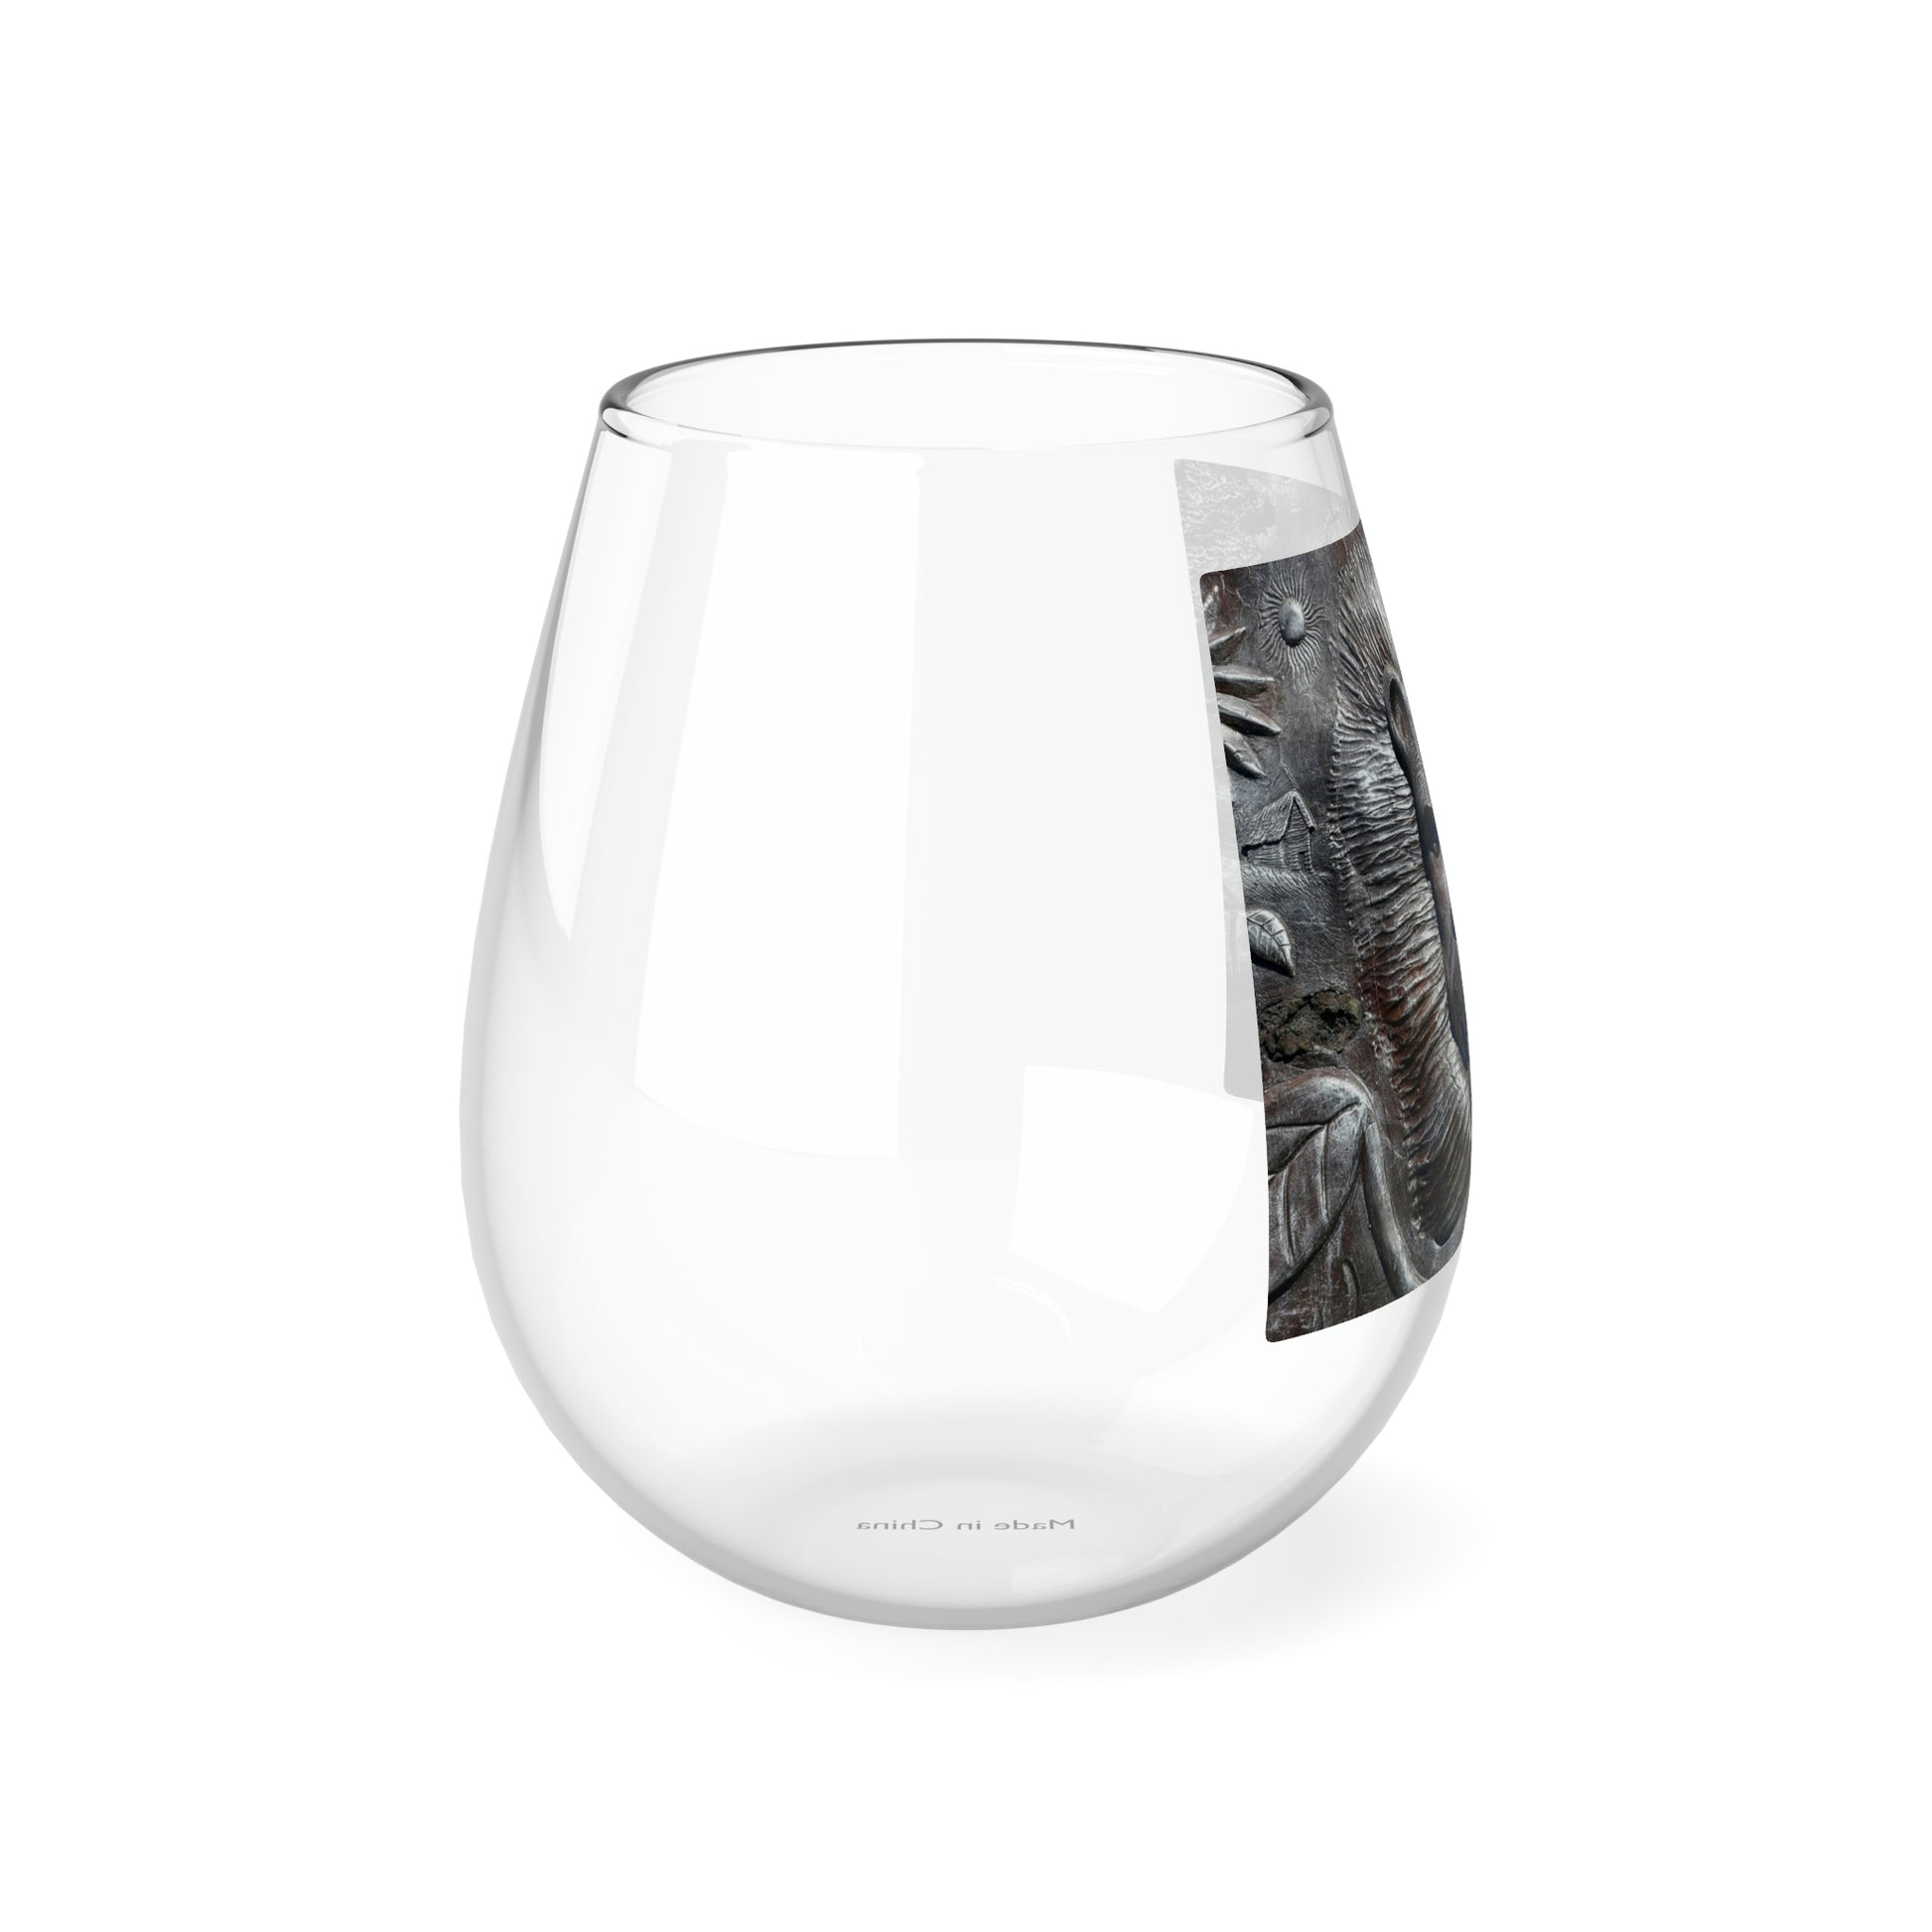 Lion's Friends Forever - Stemless Wine Glass, 11.75 oz - Fry1Productions